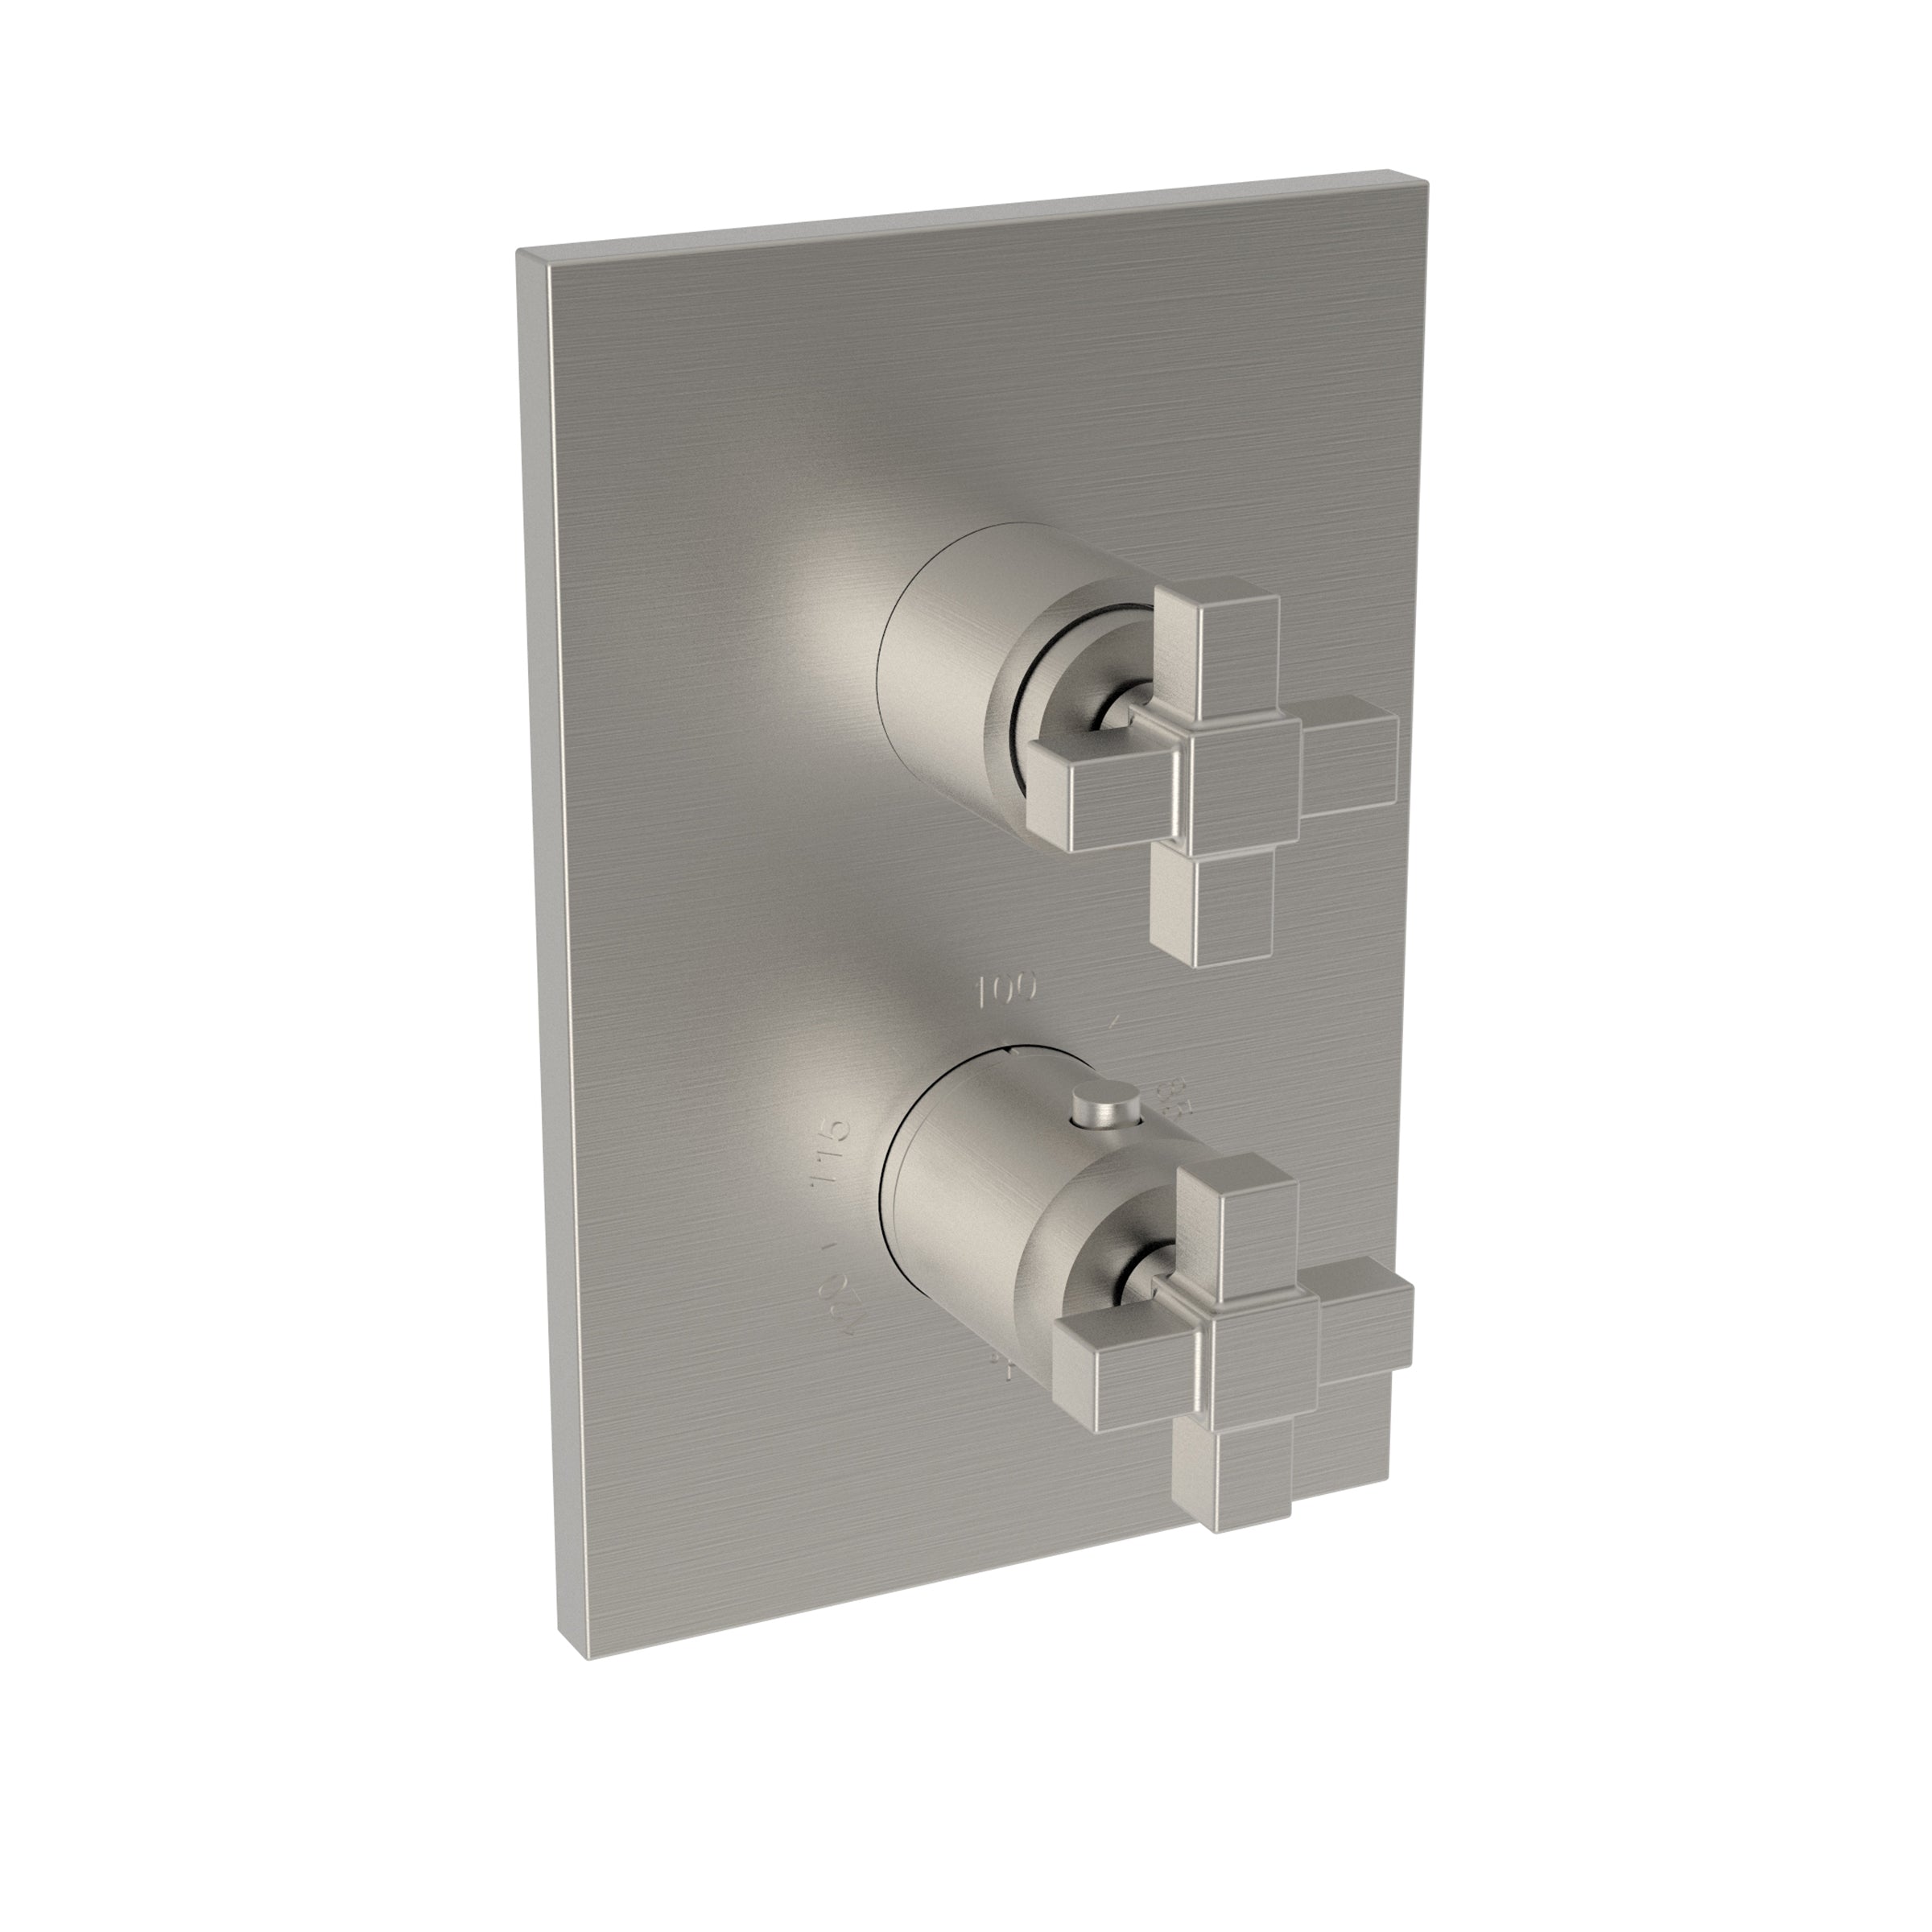 Newport Brass Malvina 1/2" Square Thermostatic Trim Plate with Handle